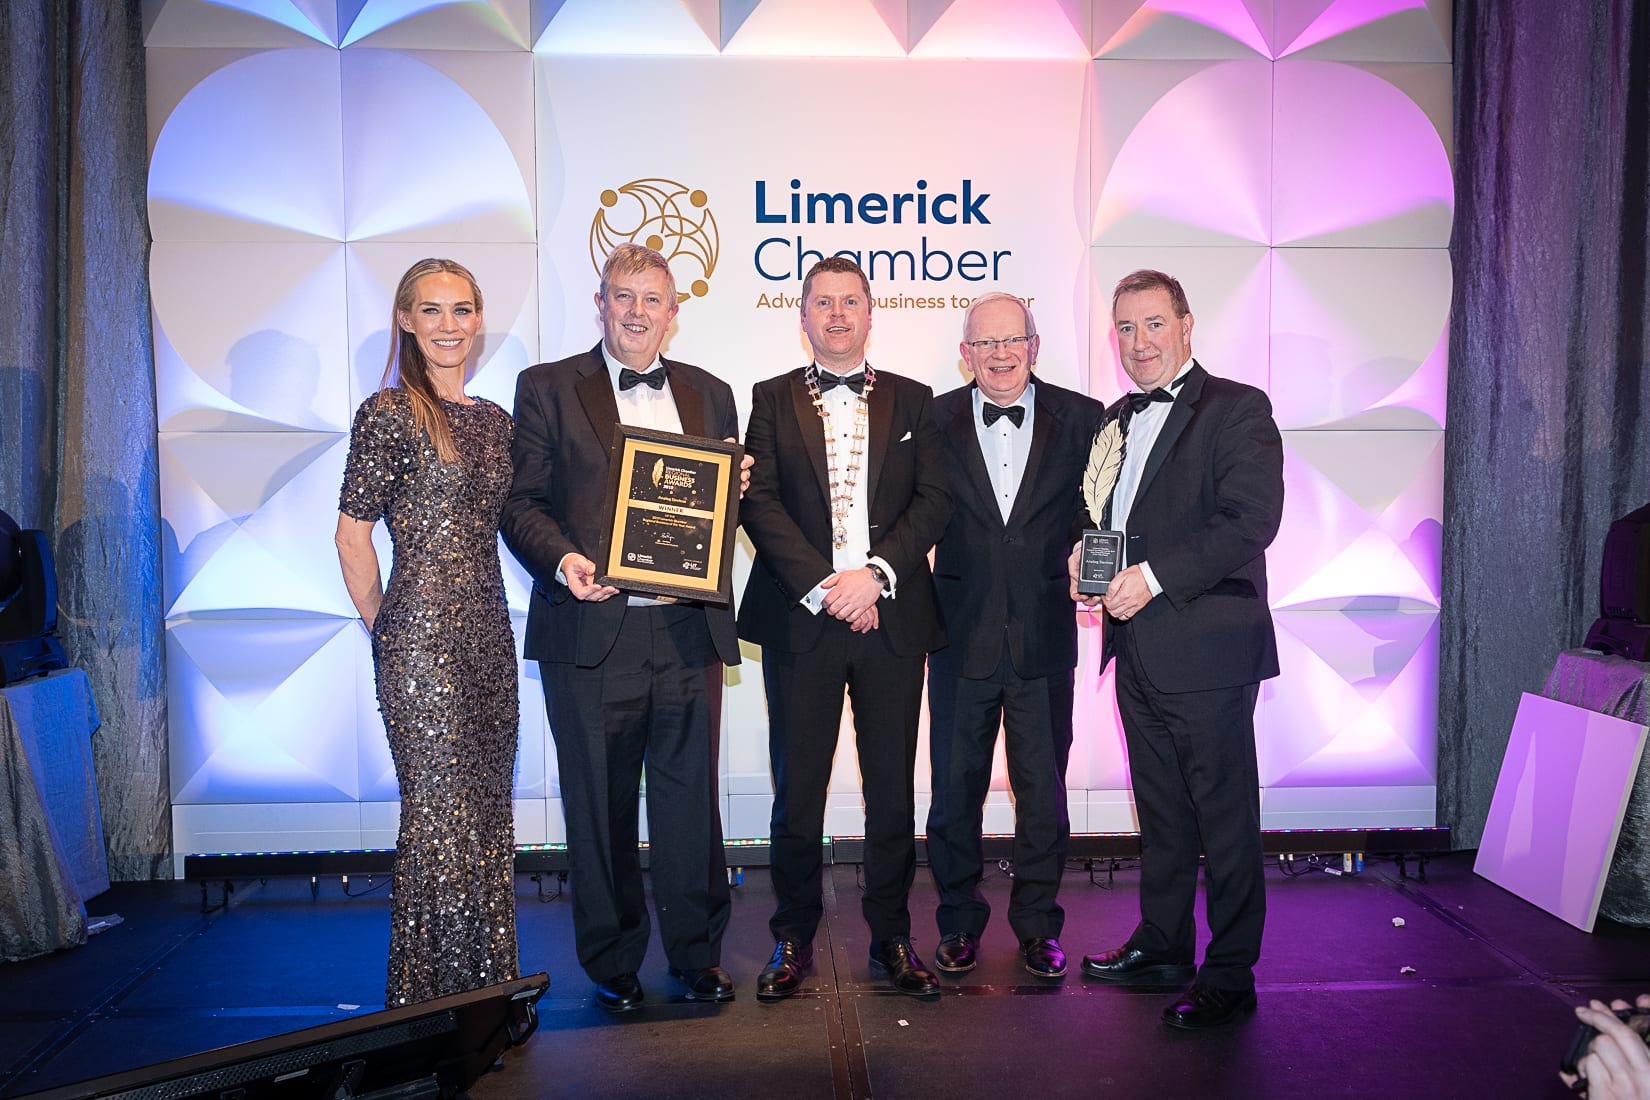 No repro fee-Limerick Chamber President’s Dinner
and Limerick Chamber Regional Business Awards 2019 which was held in the Strand Hotel on Friday 15th November /Best Overall/  - From Left to Right: Dee Ryan - CEO Limerick Chamber, Liam McHugh  - Overall Winner / Analog Devices, Eoin Ryan - President Limerick Chamber, Professor Vincent Cunnane- President LIT / Sponsor,  Denis Doyle - Overall Winner / Analog Devices, 
Photo credit Shauna Kennedy